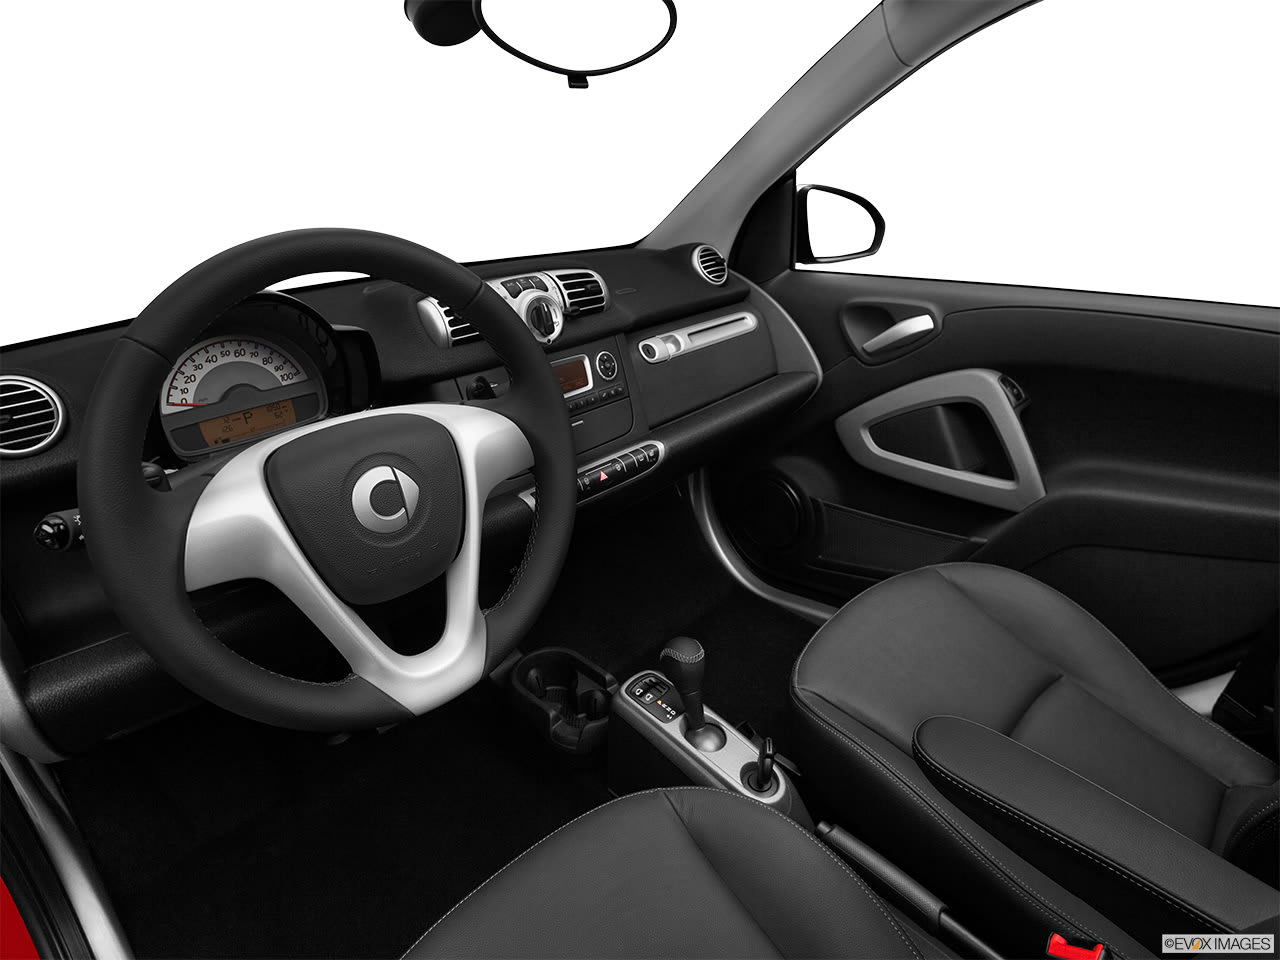 A Buyer's Guide to the 2012 Smart ForTwo | YourMechanic Advice